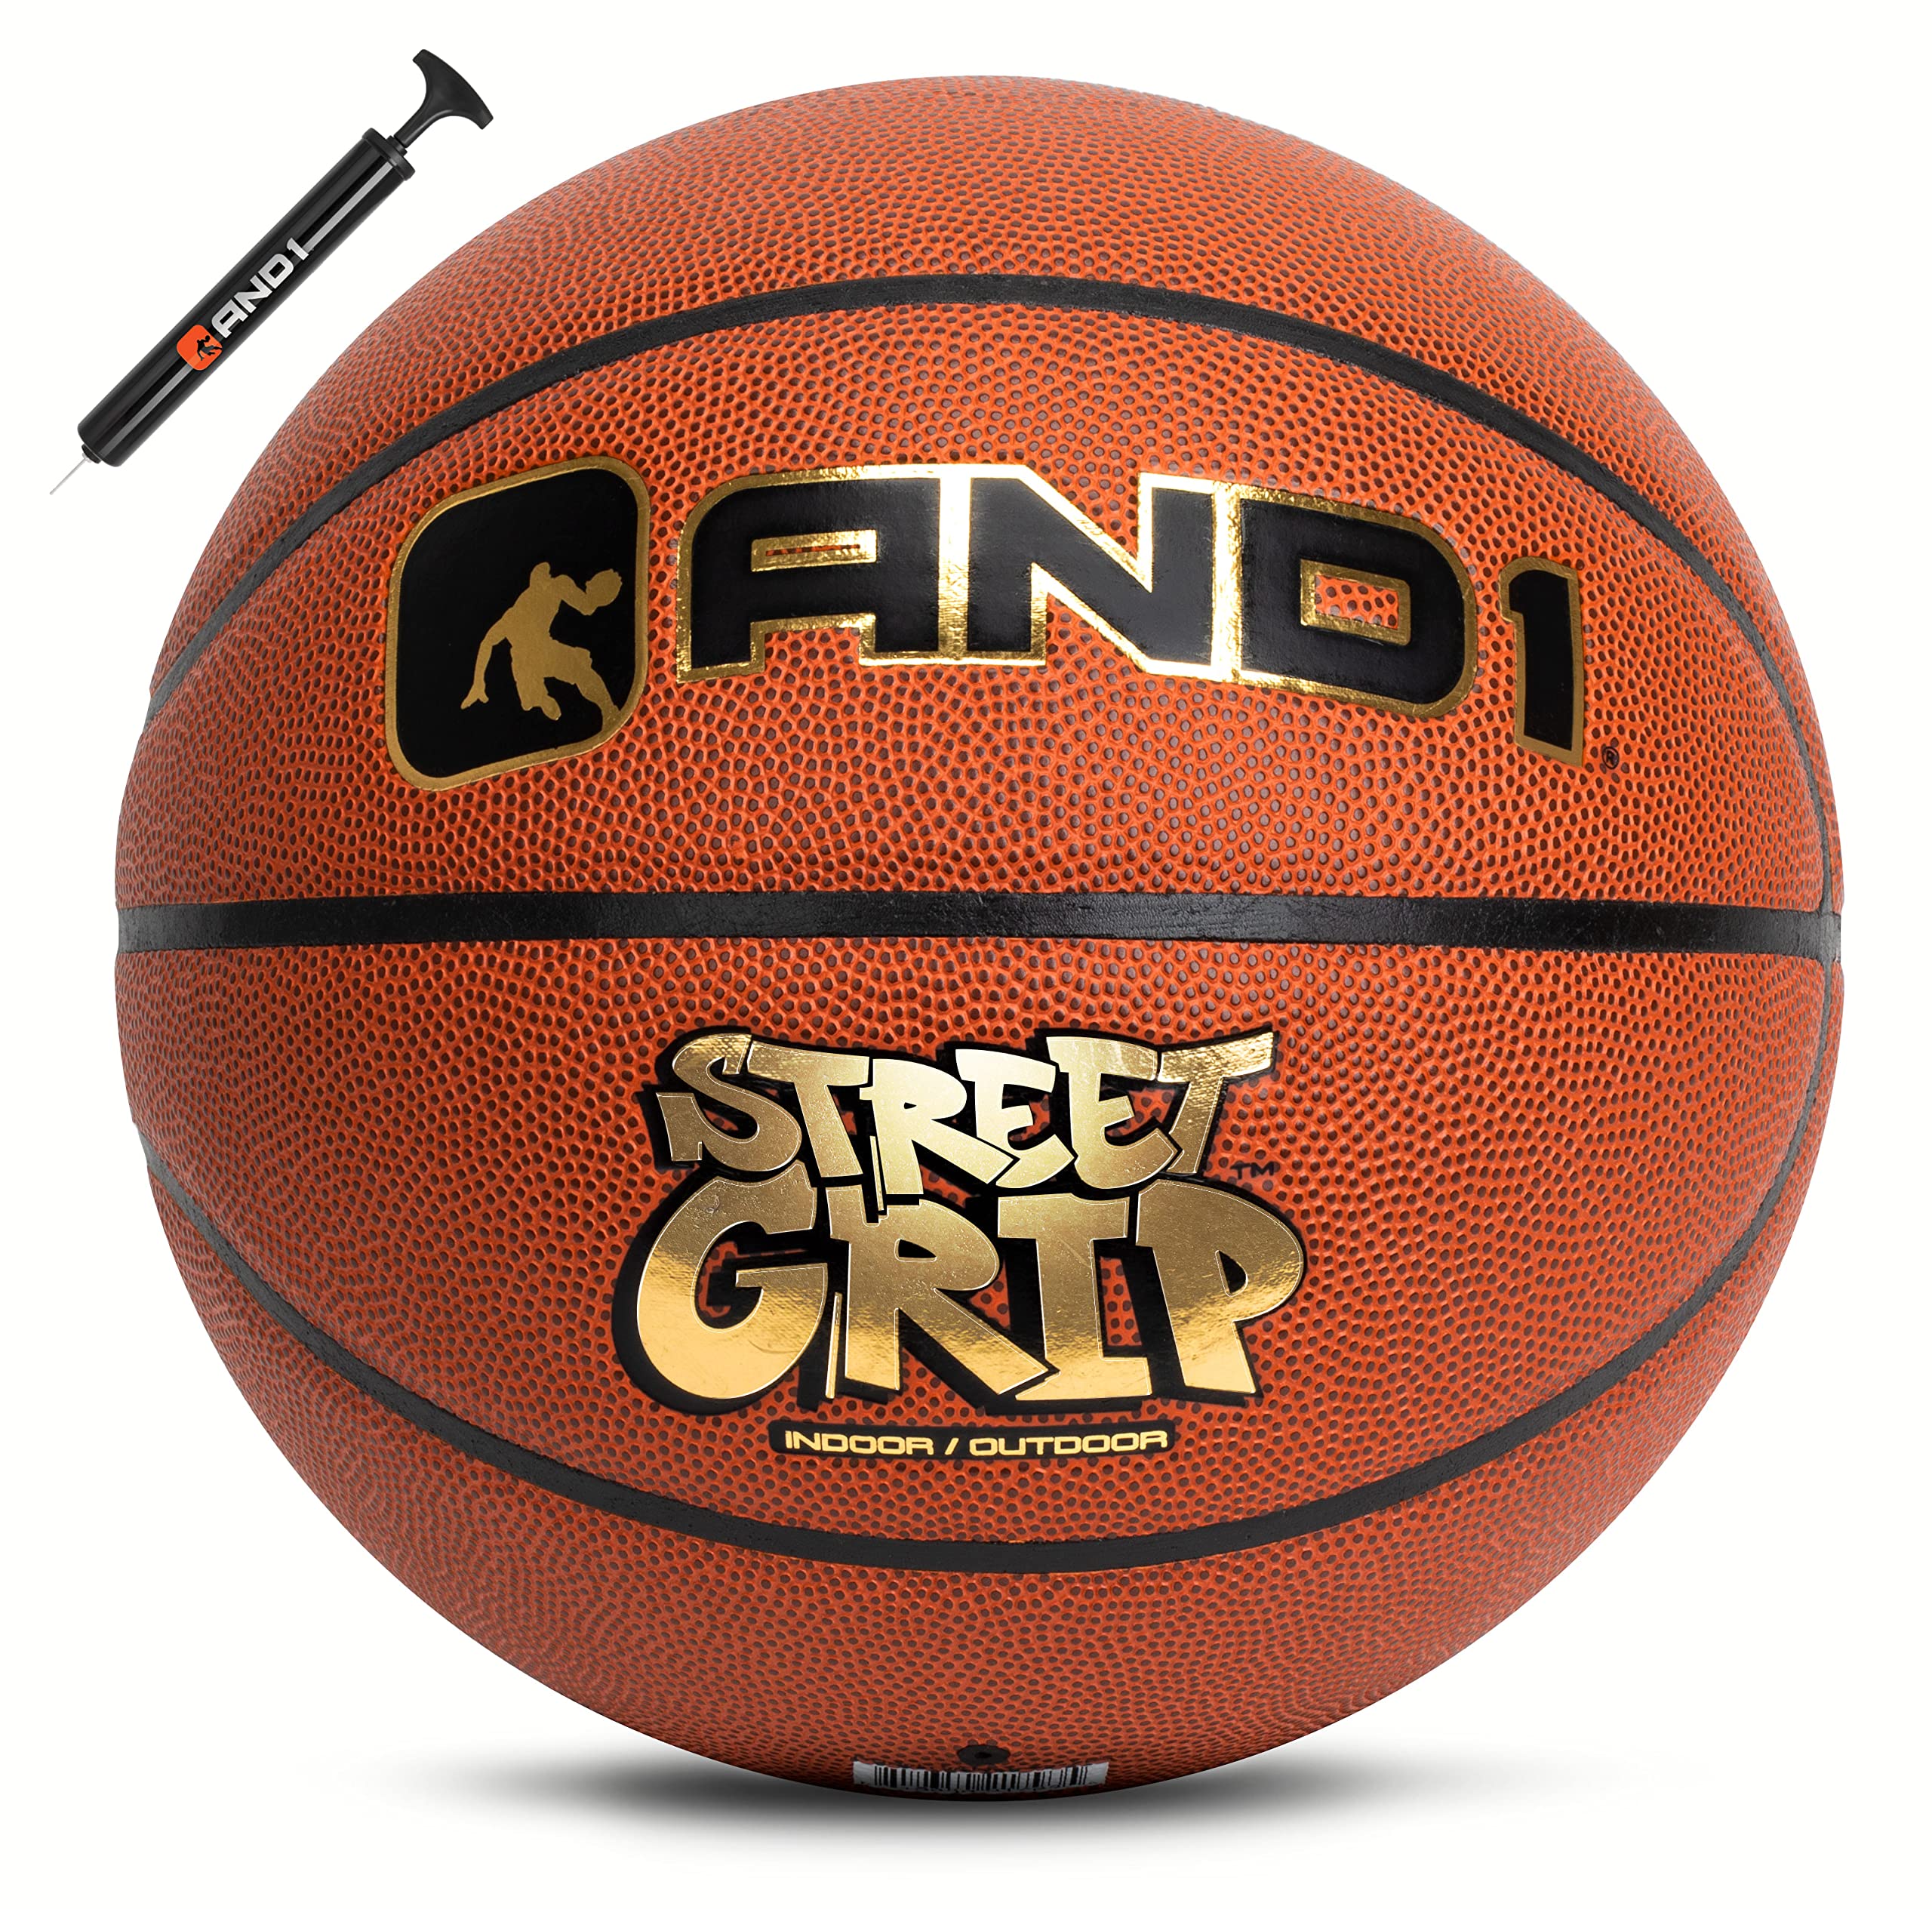 AND1 Street Grip Premium Composite Leather Basketball & Pump- Official Size 7 (29.5”) Streetball, Made for Indoor and Outdoor Basketball Games